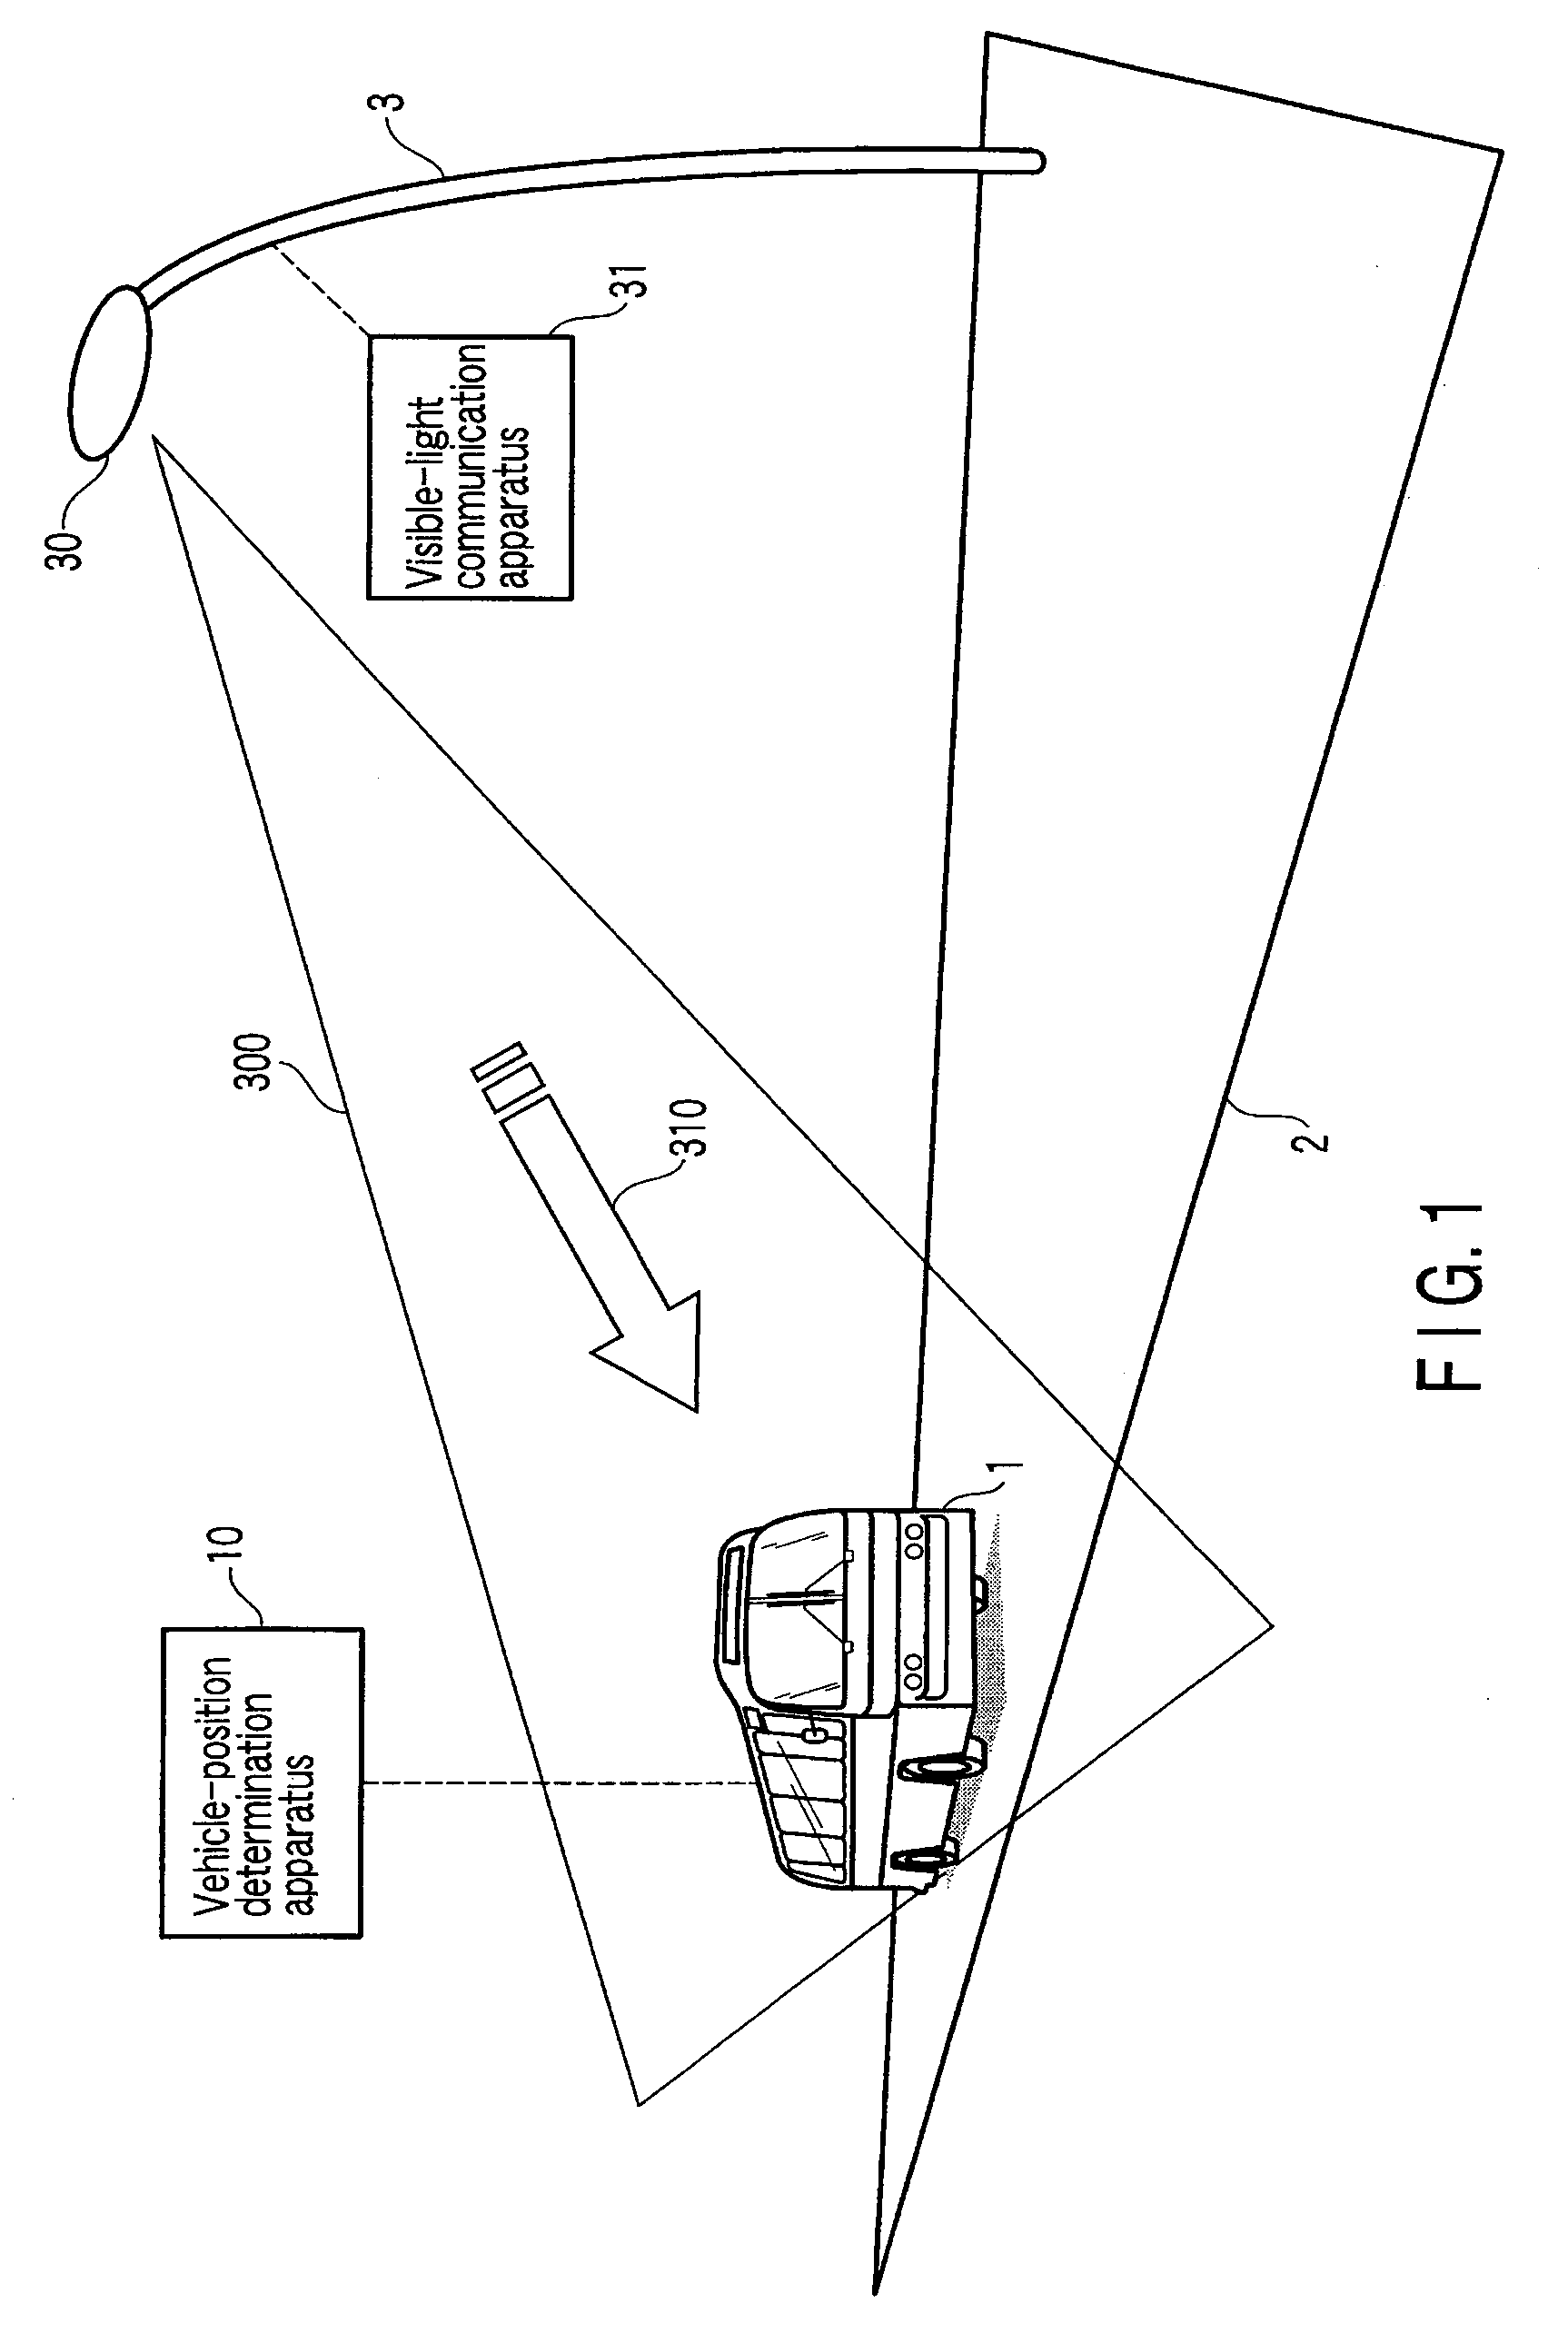 Method and apparatus for determining the position of a moving object, by using visible light communication